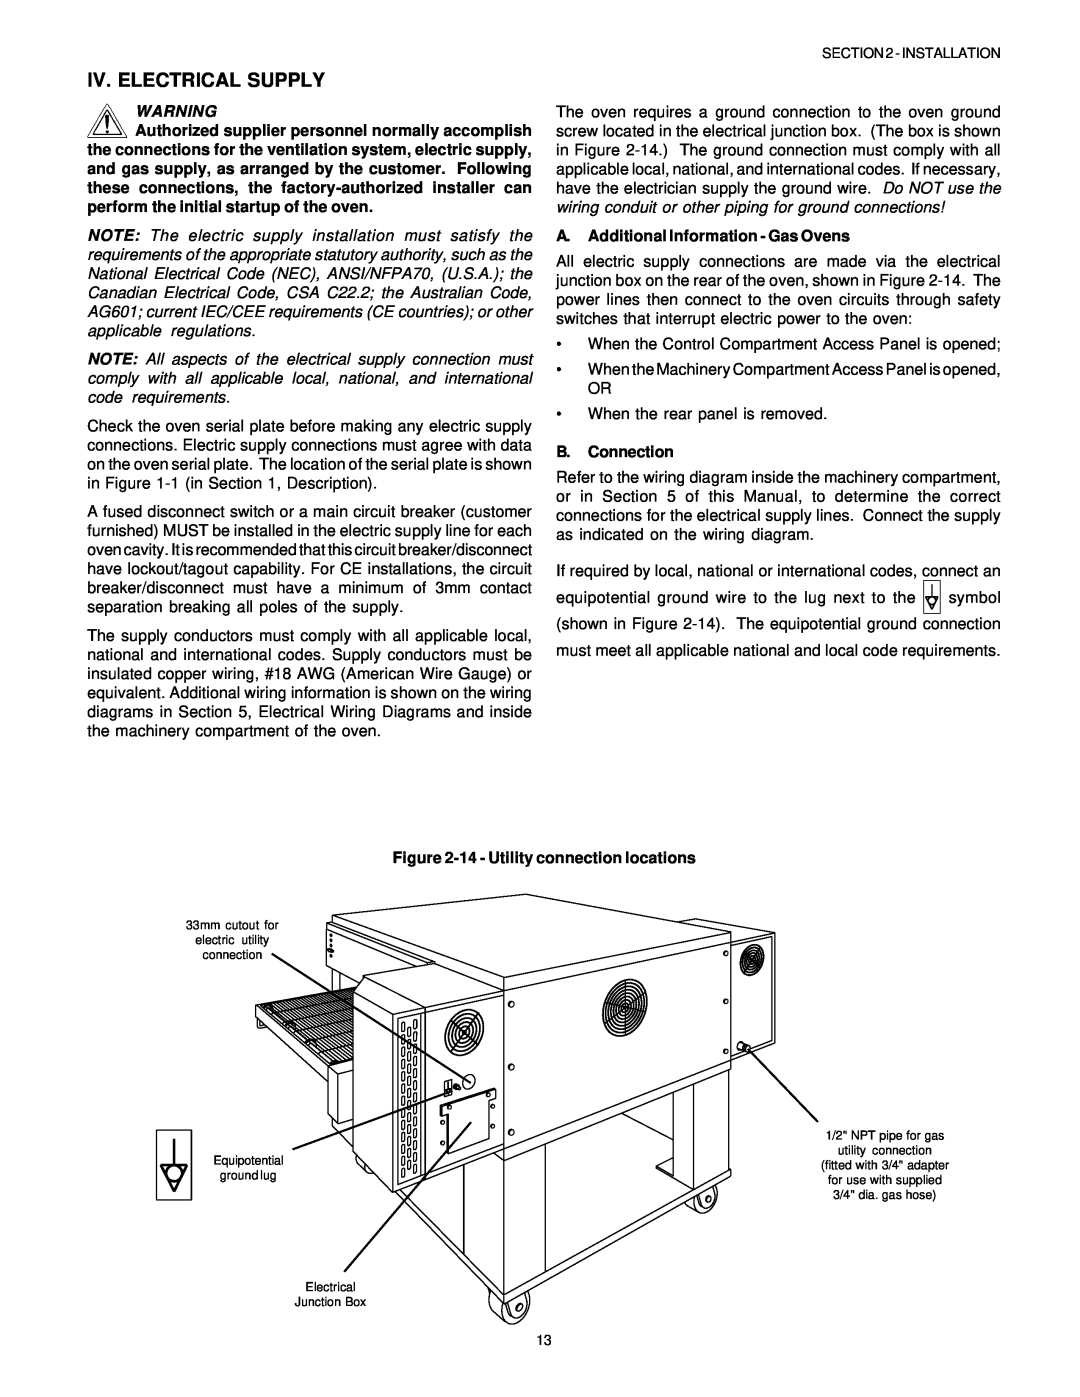 Middleby Marshall PS536GS manual English, Iv. Electrical Supply, A. Additional Information - Gas Ovens, B.Connection 